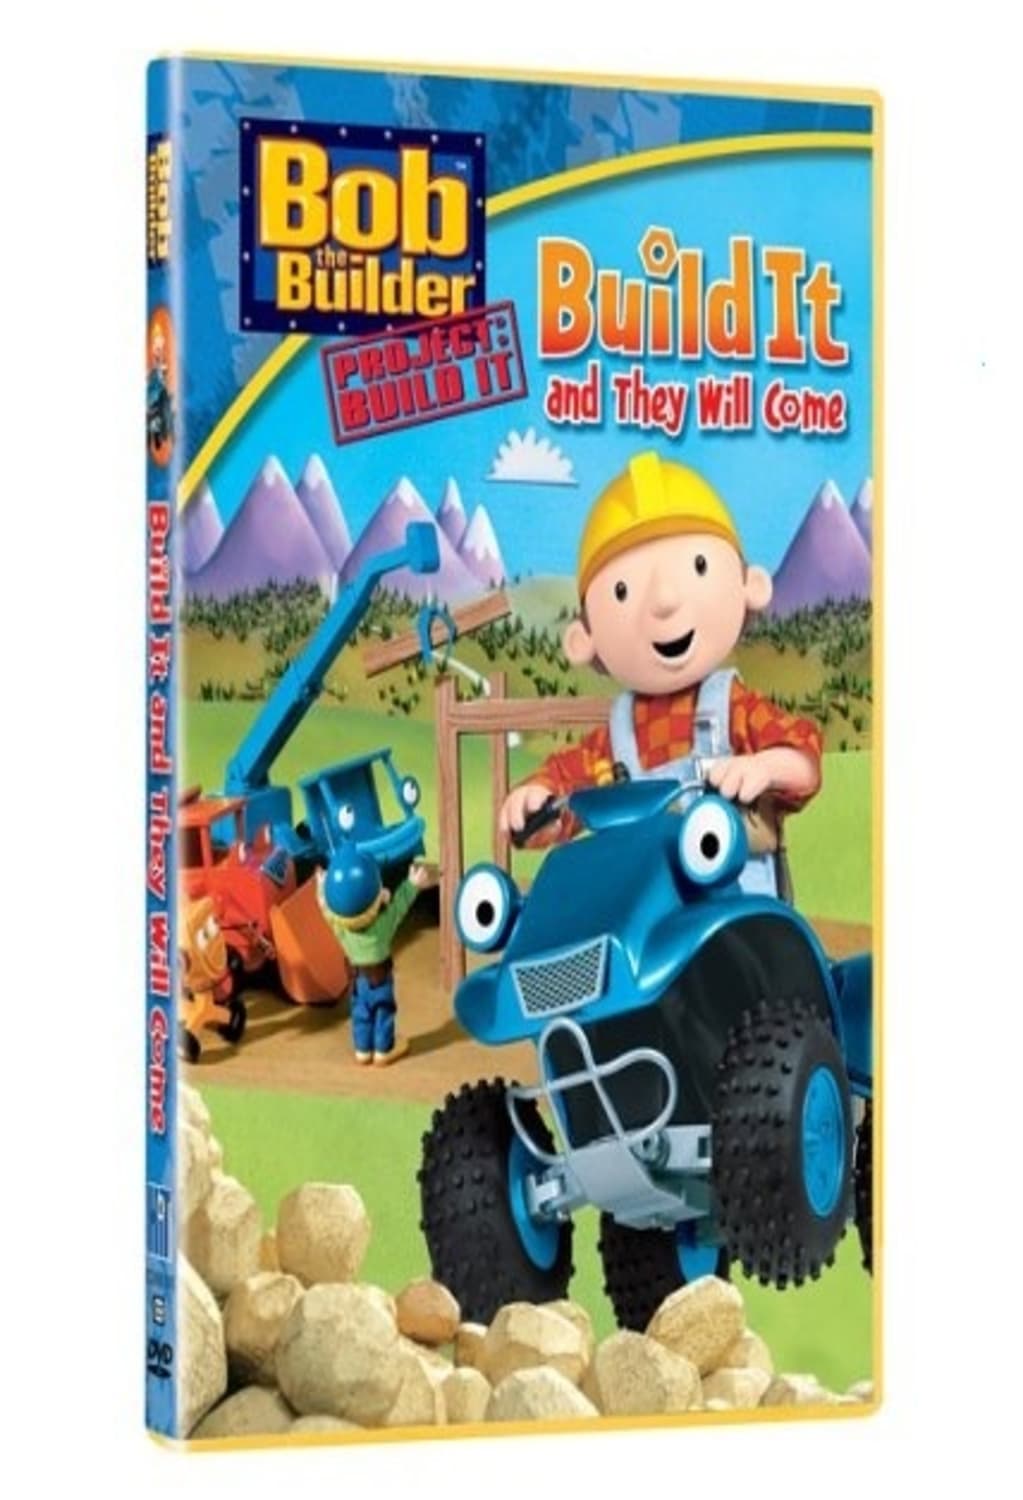 Bob the Builder: Build it and They Will Come (DVD) on MovieShack